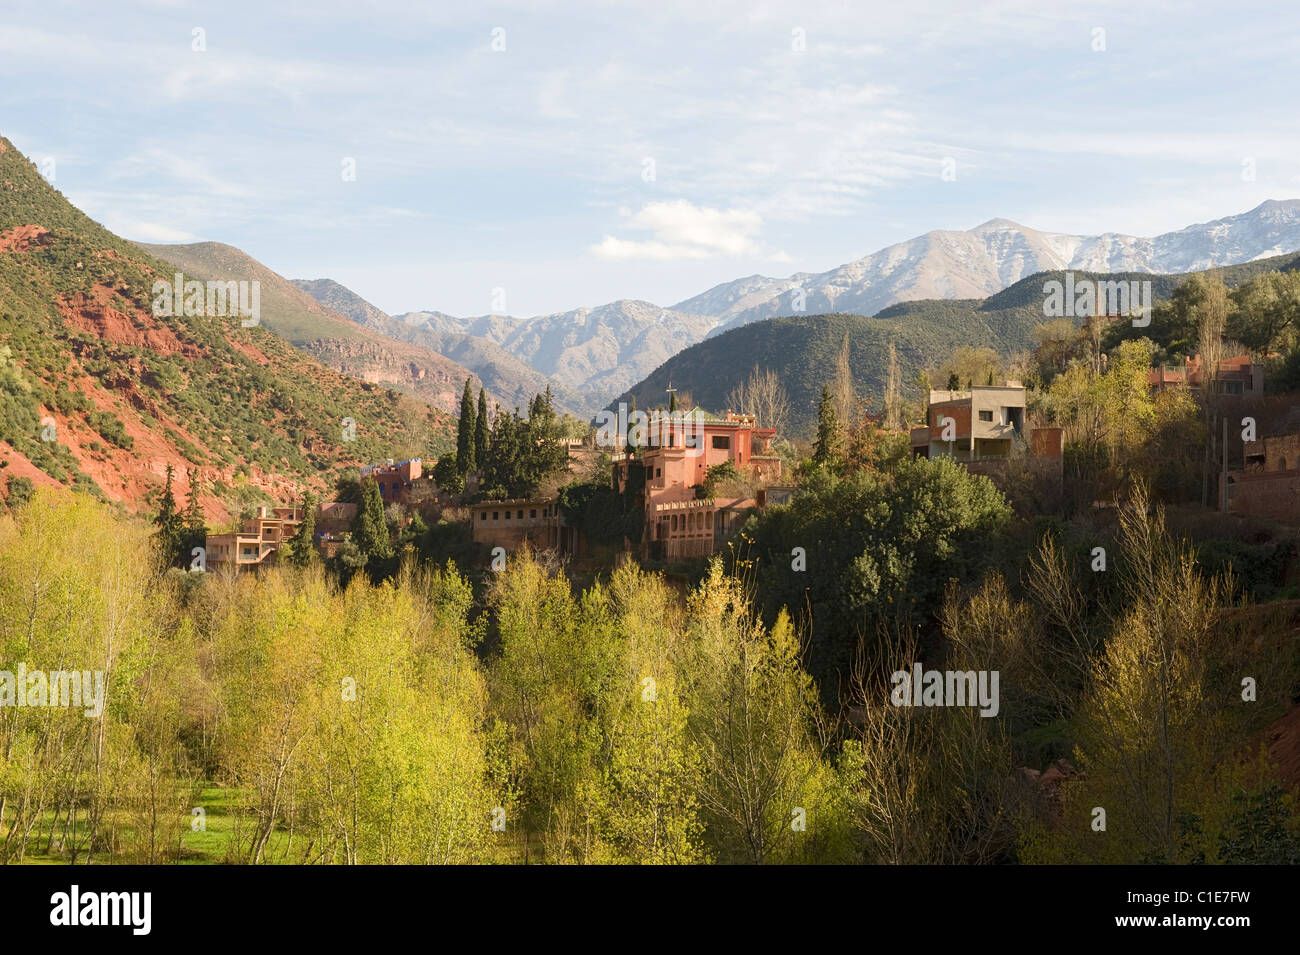 A view in the Ourika Valley Stock Photo